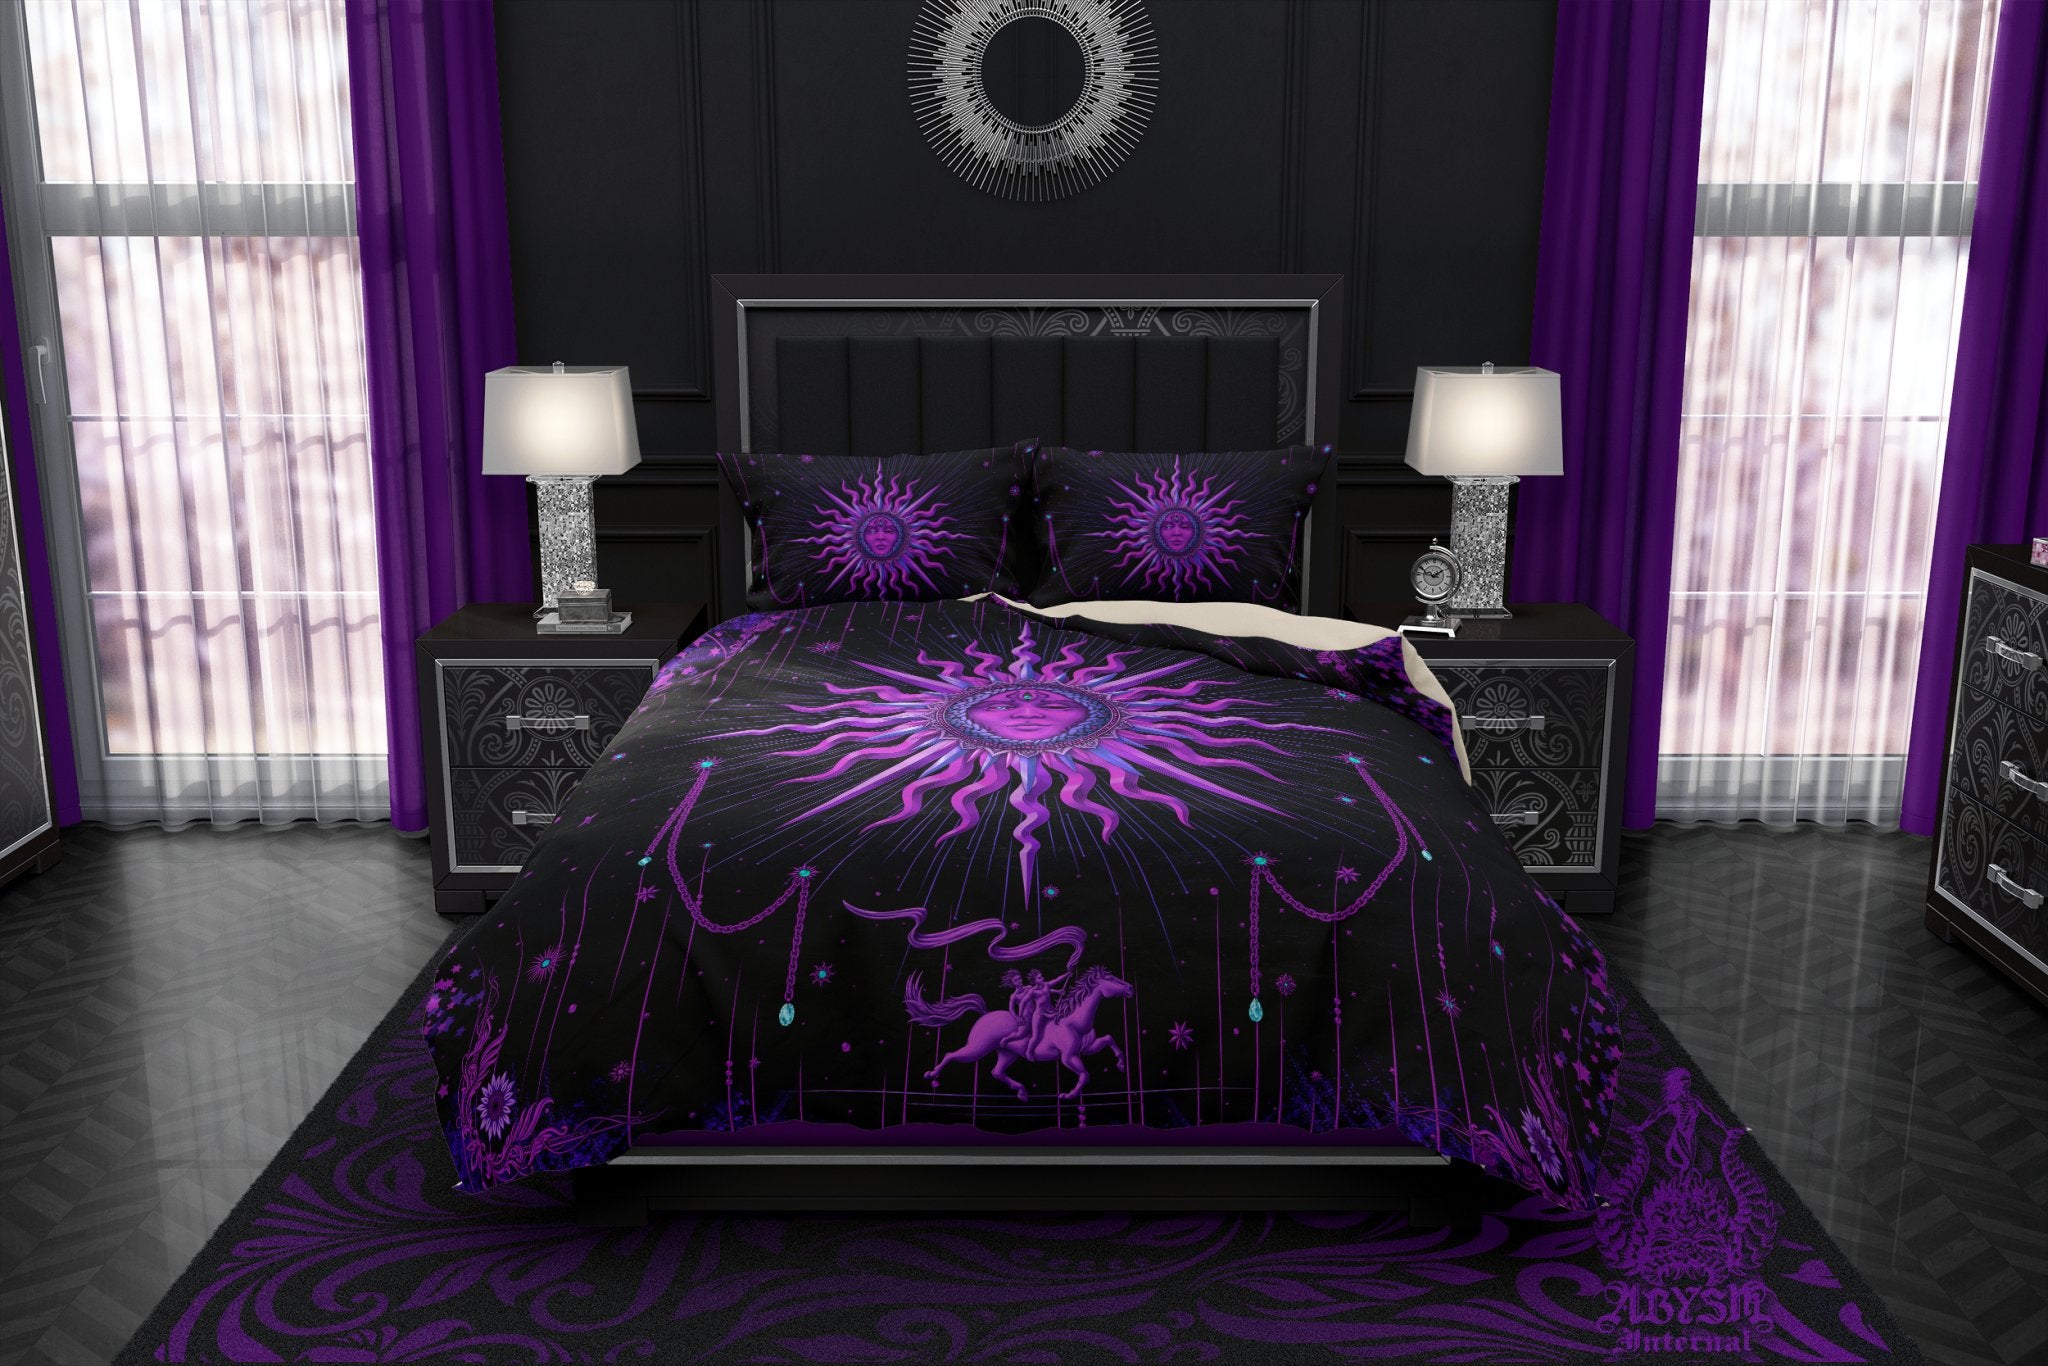 Pastel Goth Sun Duvet Cover, Bed Covering, Whimsigoth Comforter, Black and Purple Bedroom Decor King, Queen & Twin Bedding Set - Tarot Arcana Art - Abysm Internal